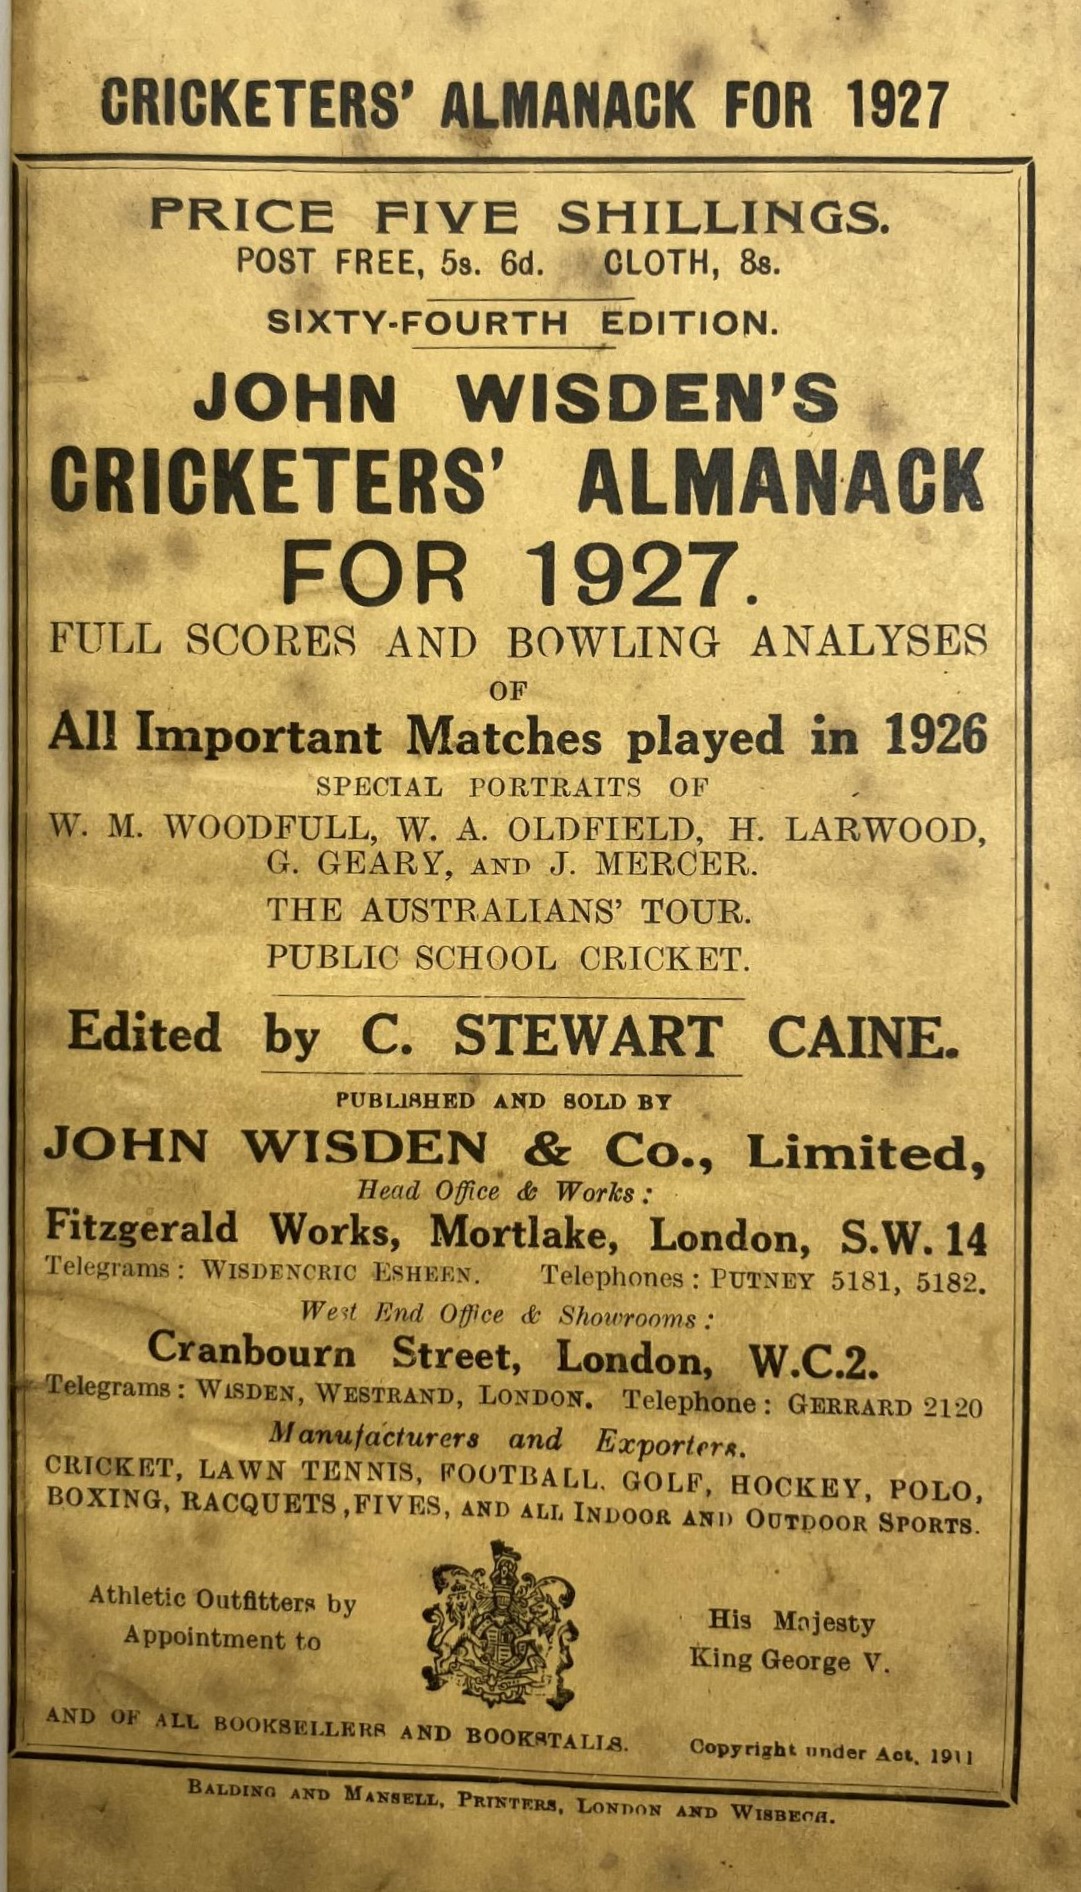 A Wisden Cricketers' Almanack, 1927 Provenance:  From the Harry Brewer Cricket Memorabilia - Image 3 of 4